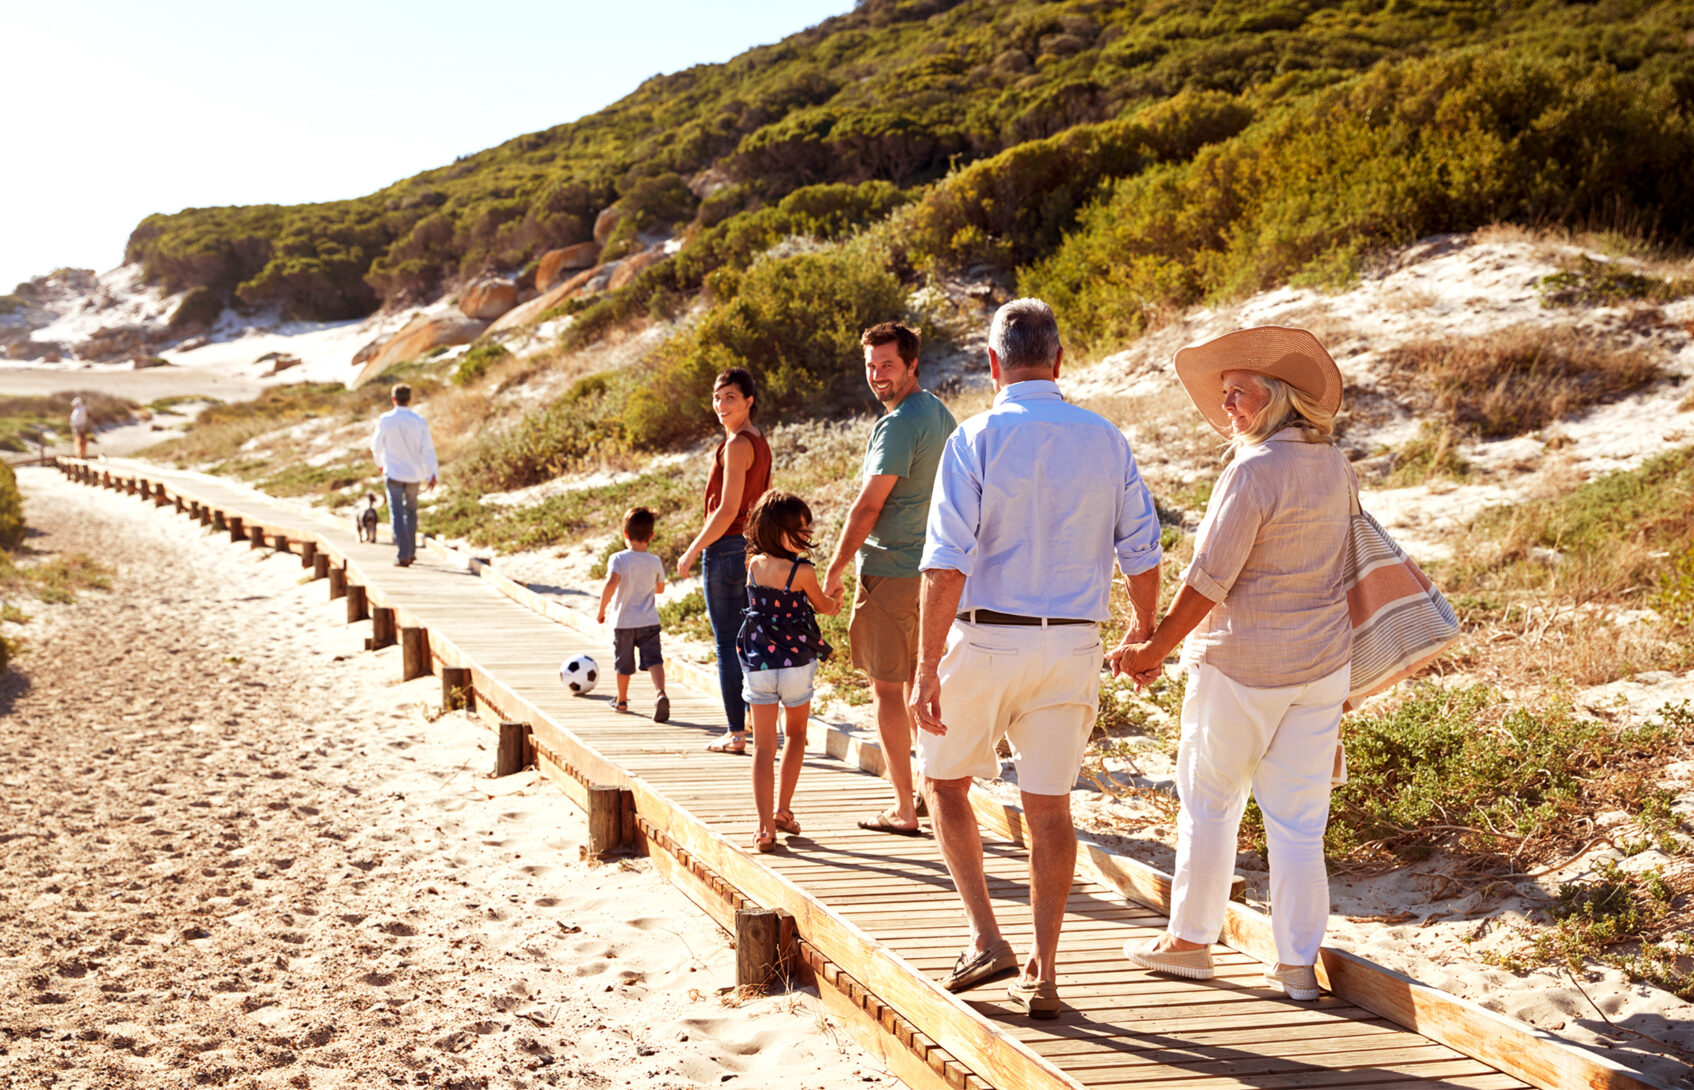 A multigenerational family walks along a wooden path on the beach